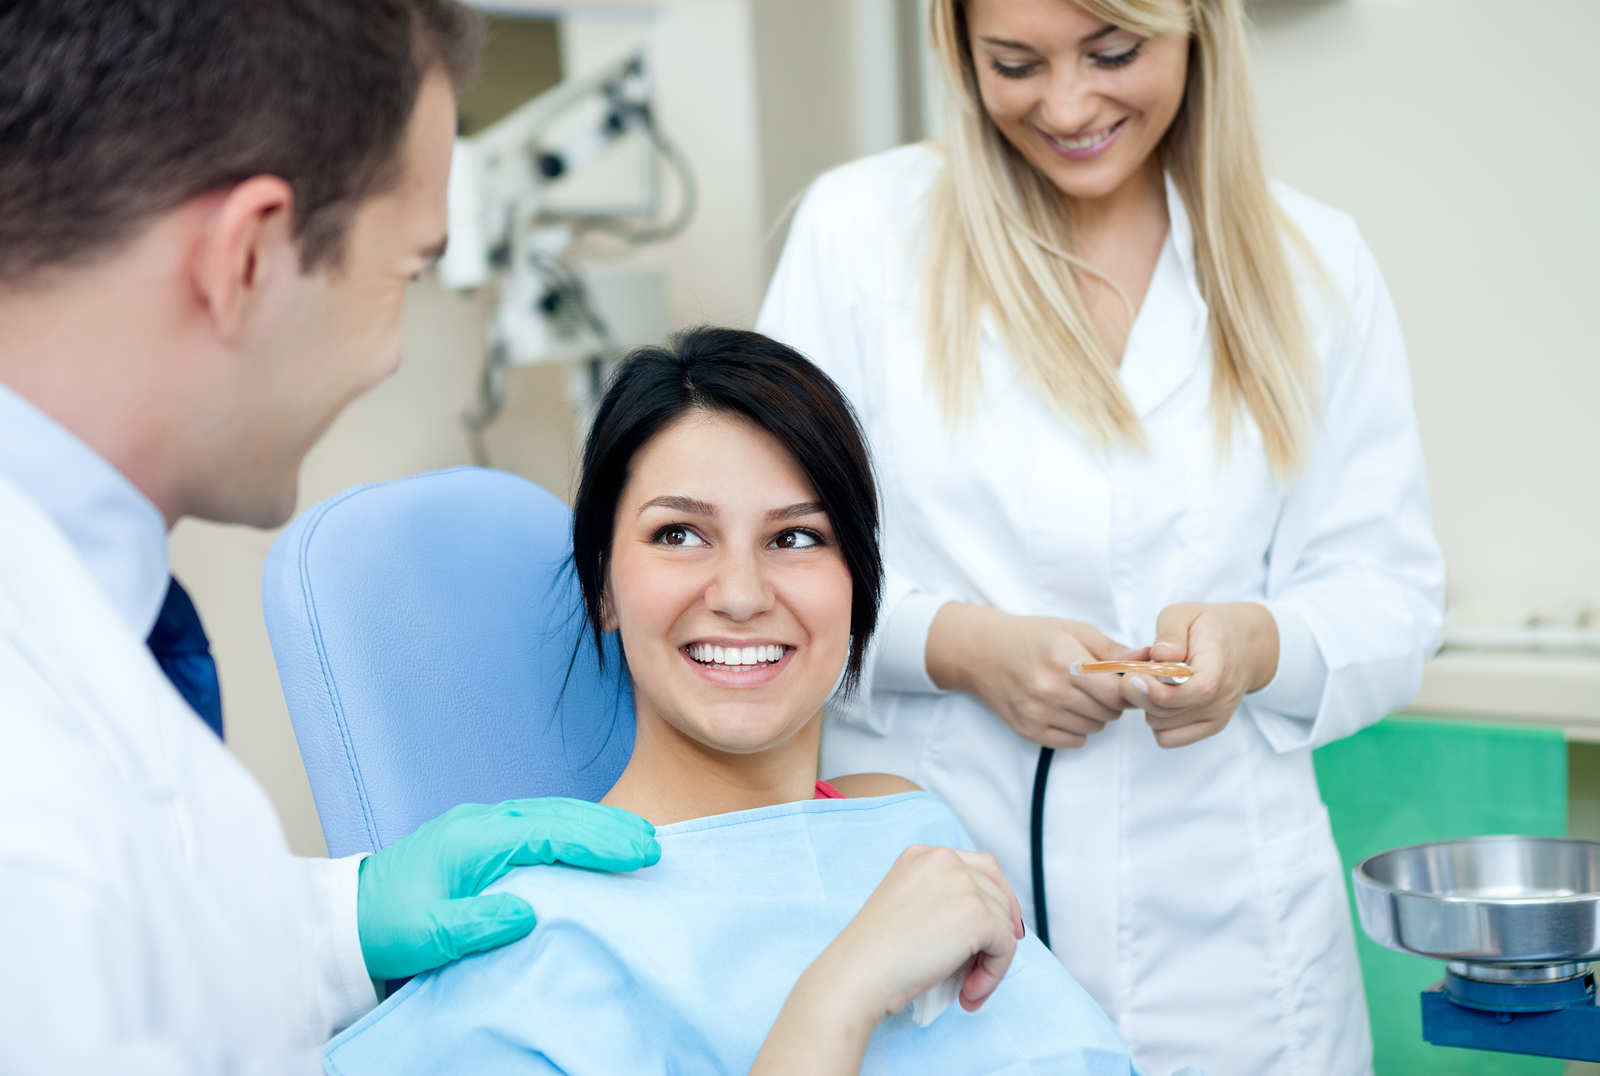 teen girl in dental chair smiling at dentist and assistant, Crittenden, KY family dentistry